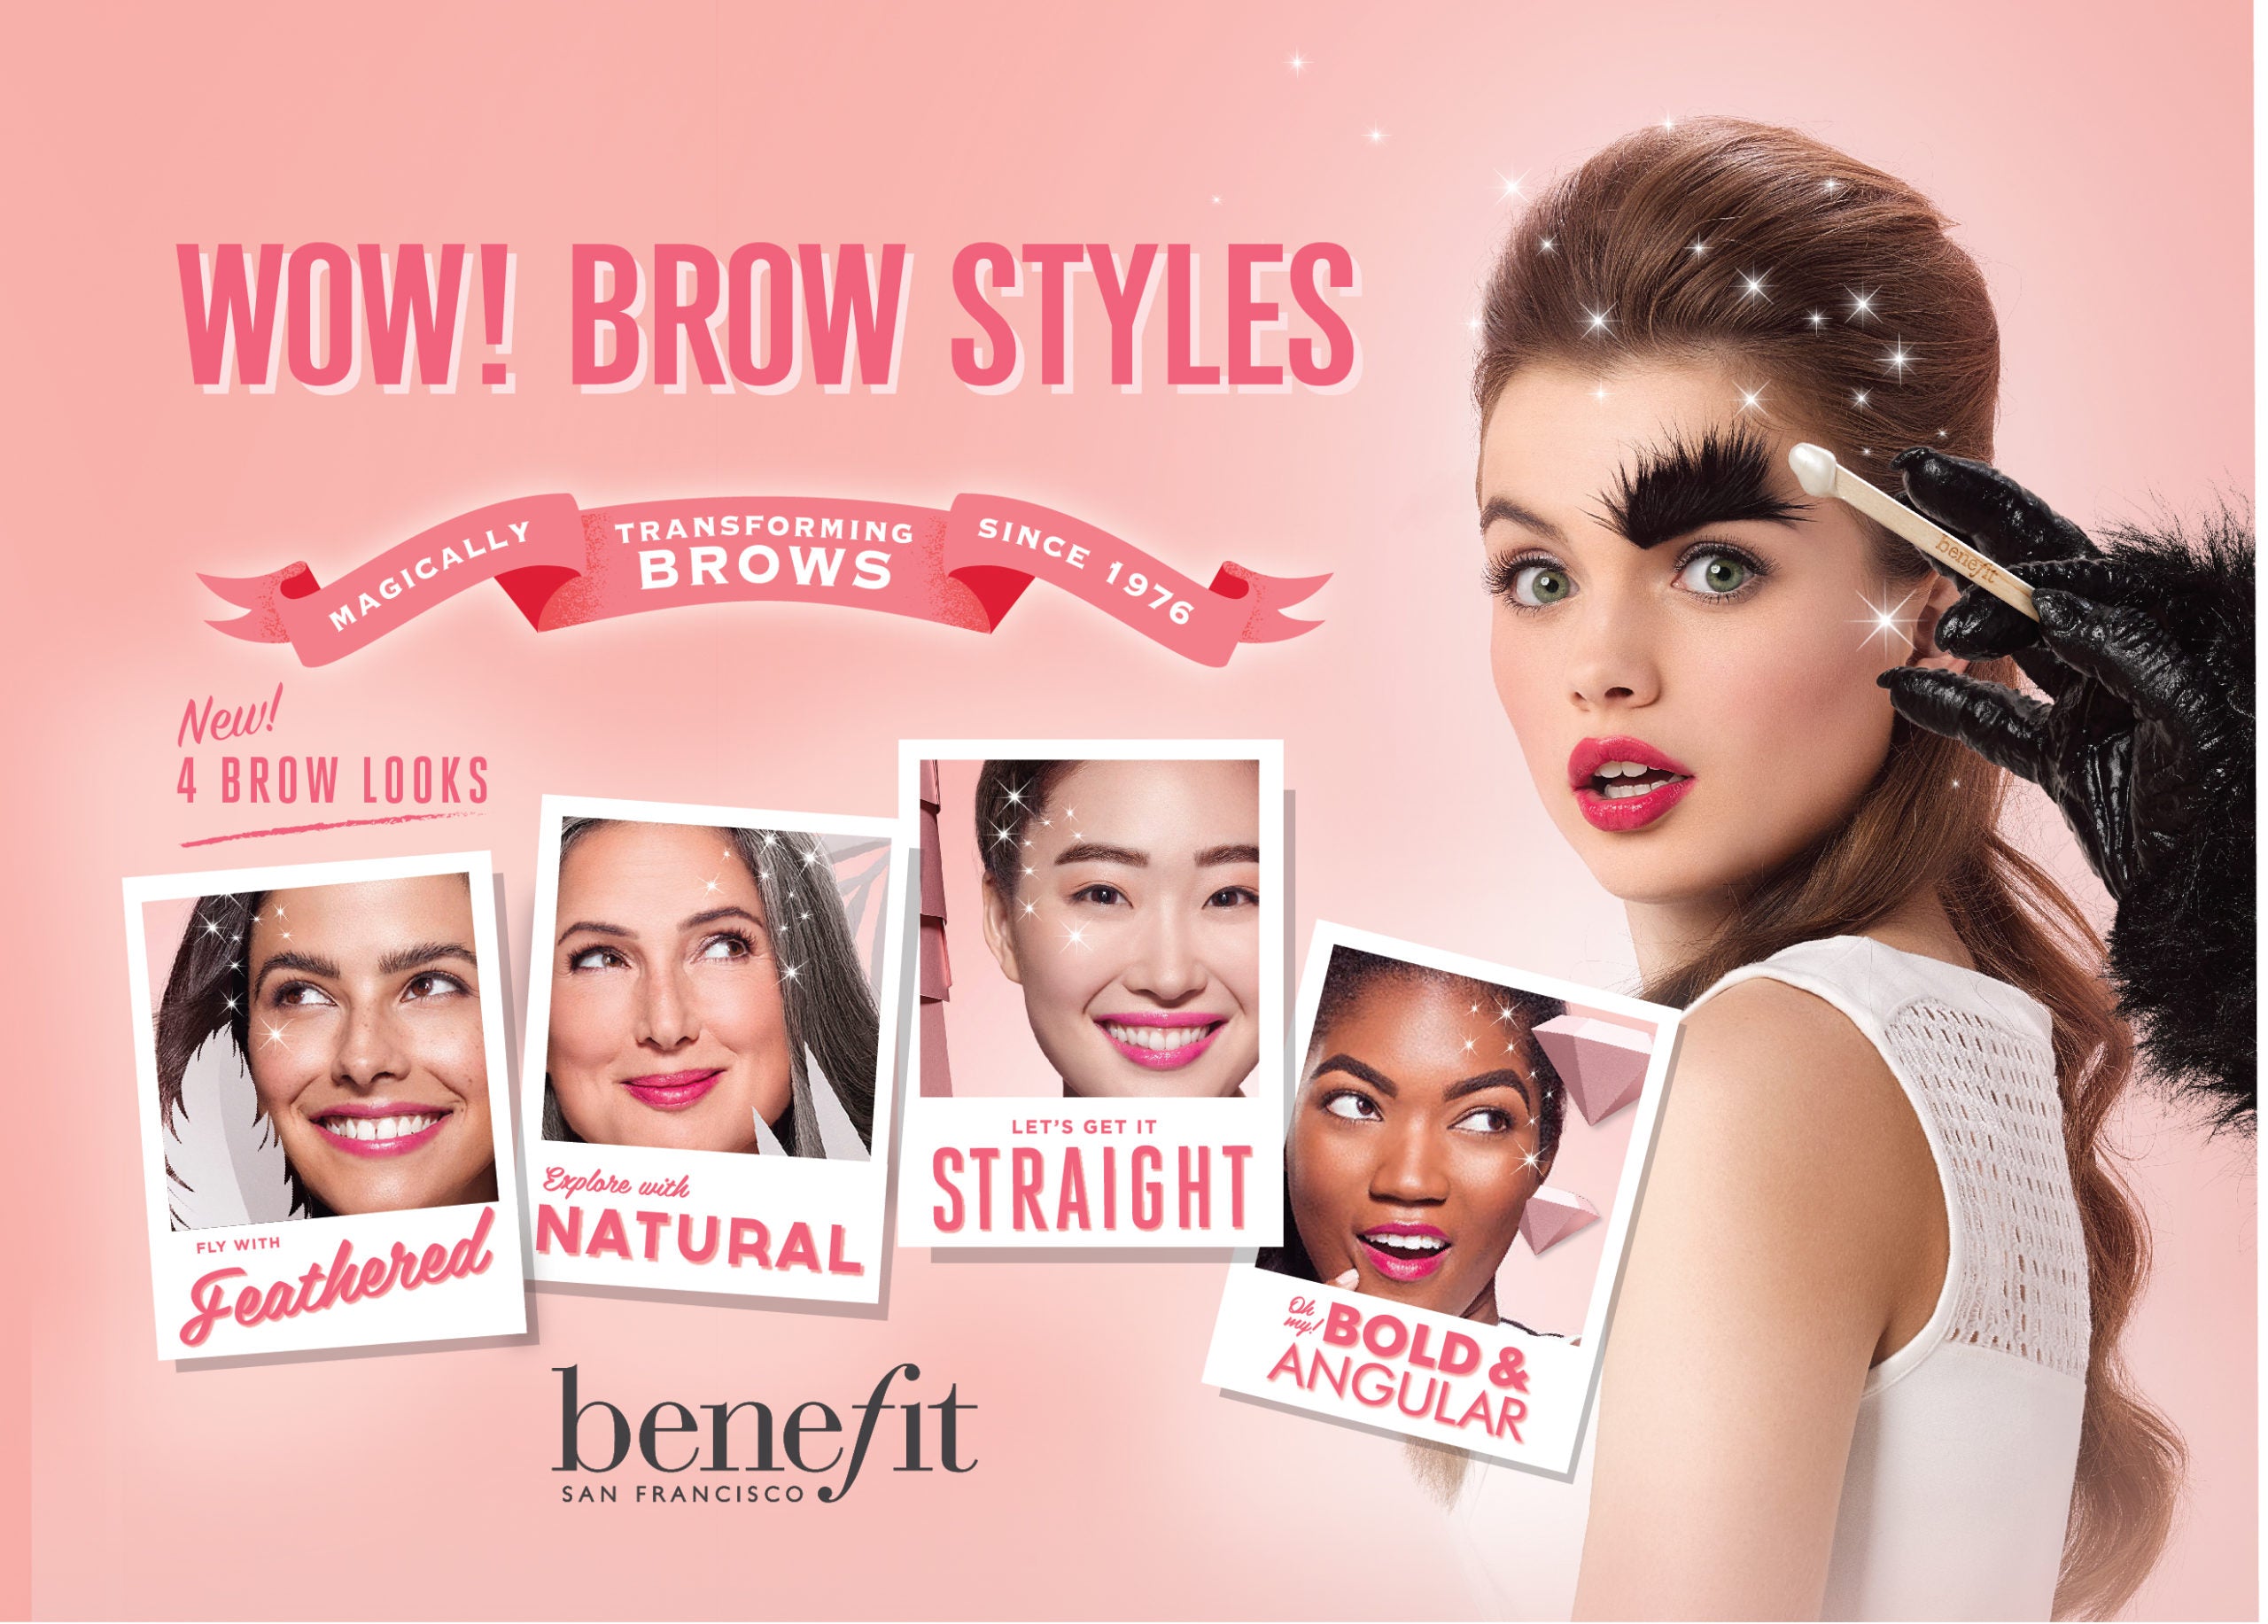 Review, Makeup Trend 2017, 2018: Benefit Brow Wow Looks, Feathered, Angular, Natural, Straight